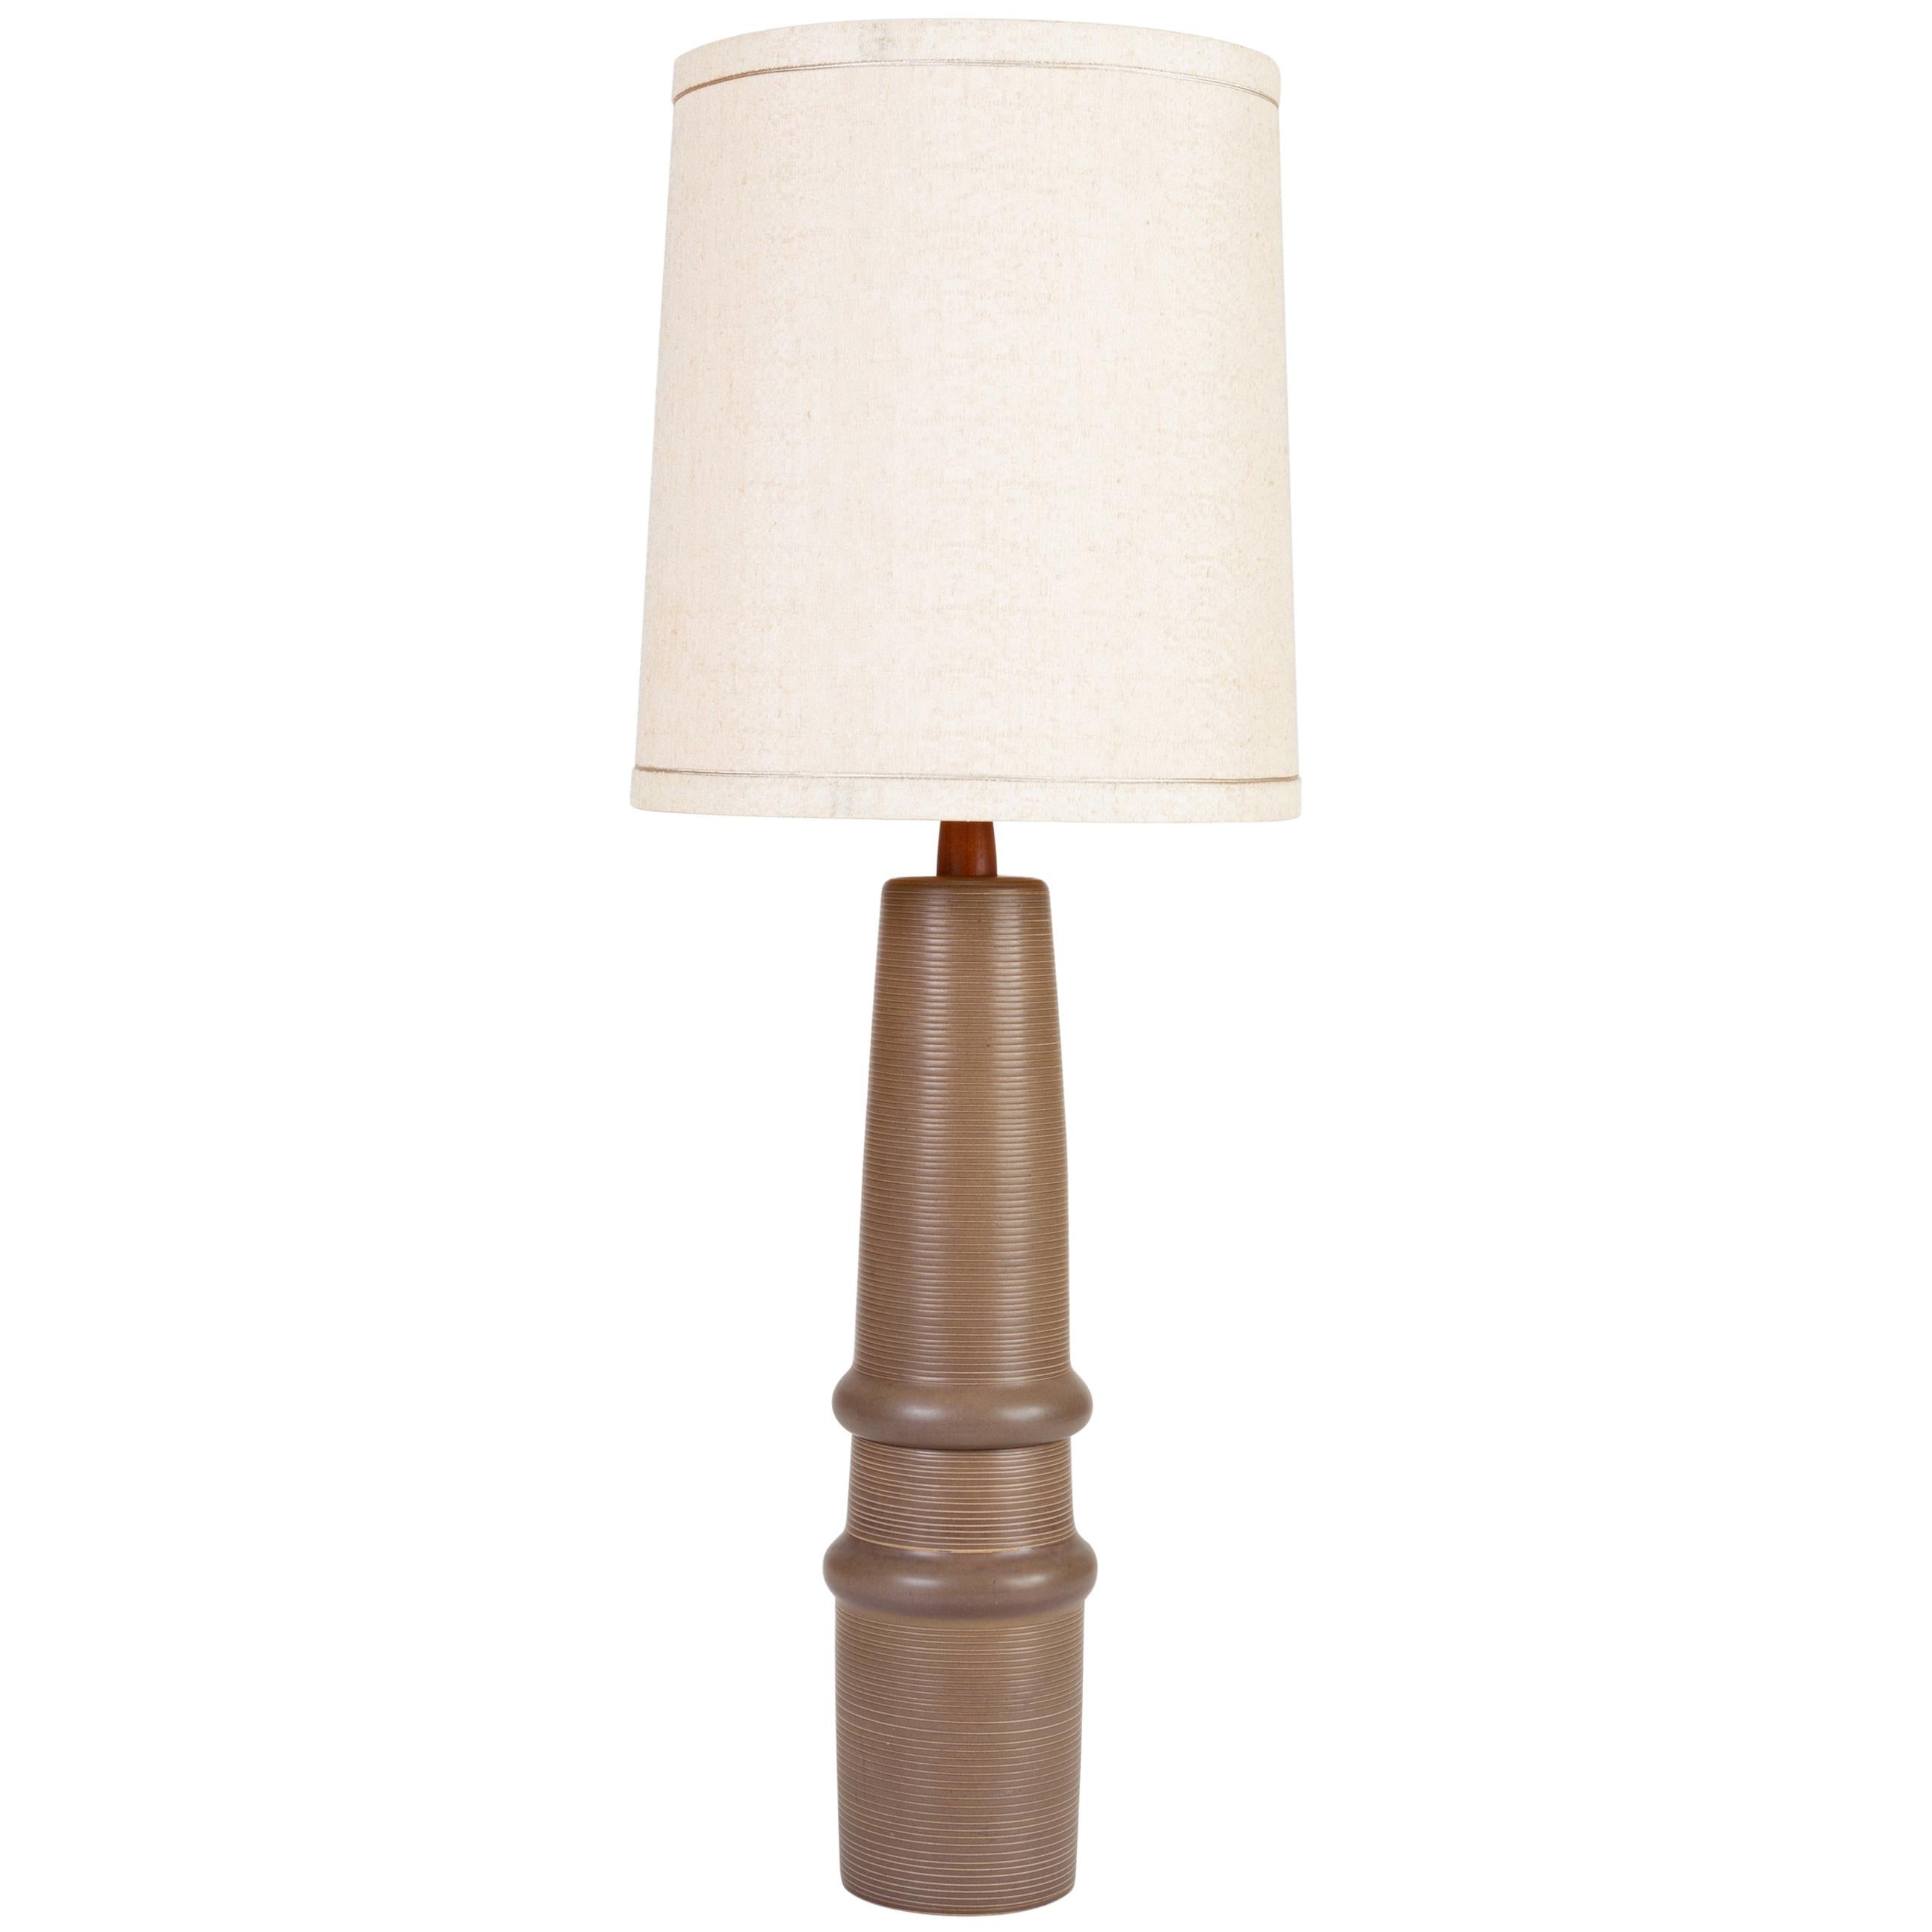 Tall Stoneware Lamp by Gordon and Jane Martz for Marshall Studios